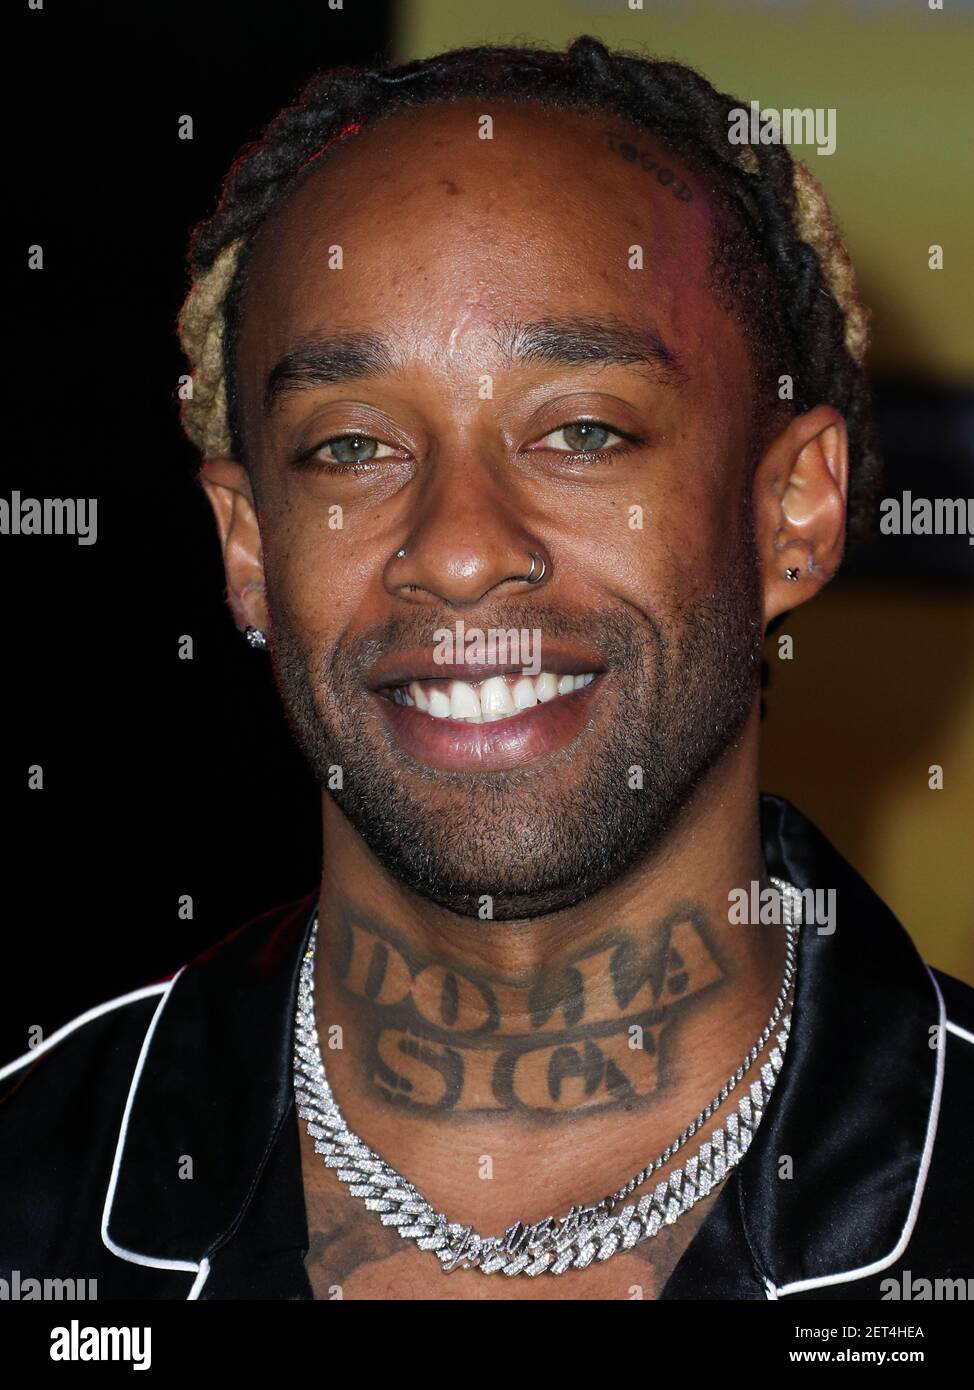 WESTWOOD, LOS ANGELES, CA, USA - DECEMBER 01: Singer Ty Dolla $ign aka Ty Dolla Sign aka Tyrone William Griffin Jr. arrives at the World Premiere Of Sony Pictures Animation And Marvel's 'Spider-Man: Into The Spider-Verse' held at the Regency Village Theatre on December 1, 2018 in Westwood, Los Angeles, California, United States. (Photo by Xavier Collin/Image Press Agency/Sipa USA) Stock Photo